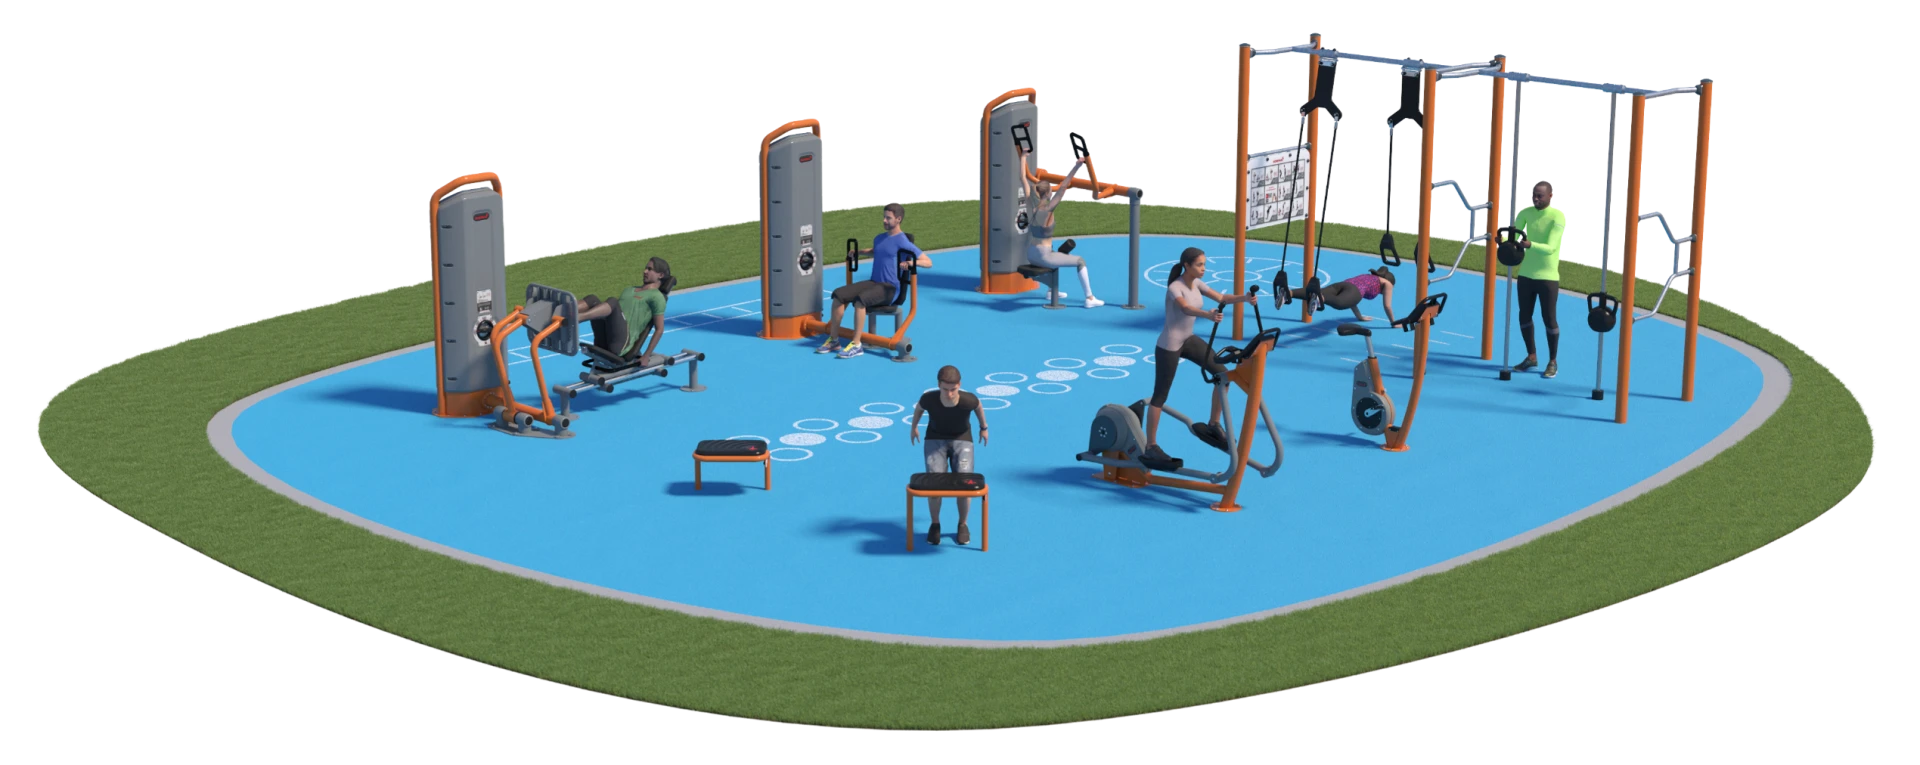 An aerial view of a park with a group of people working out